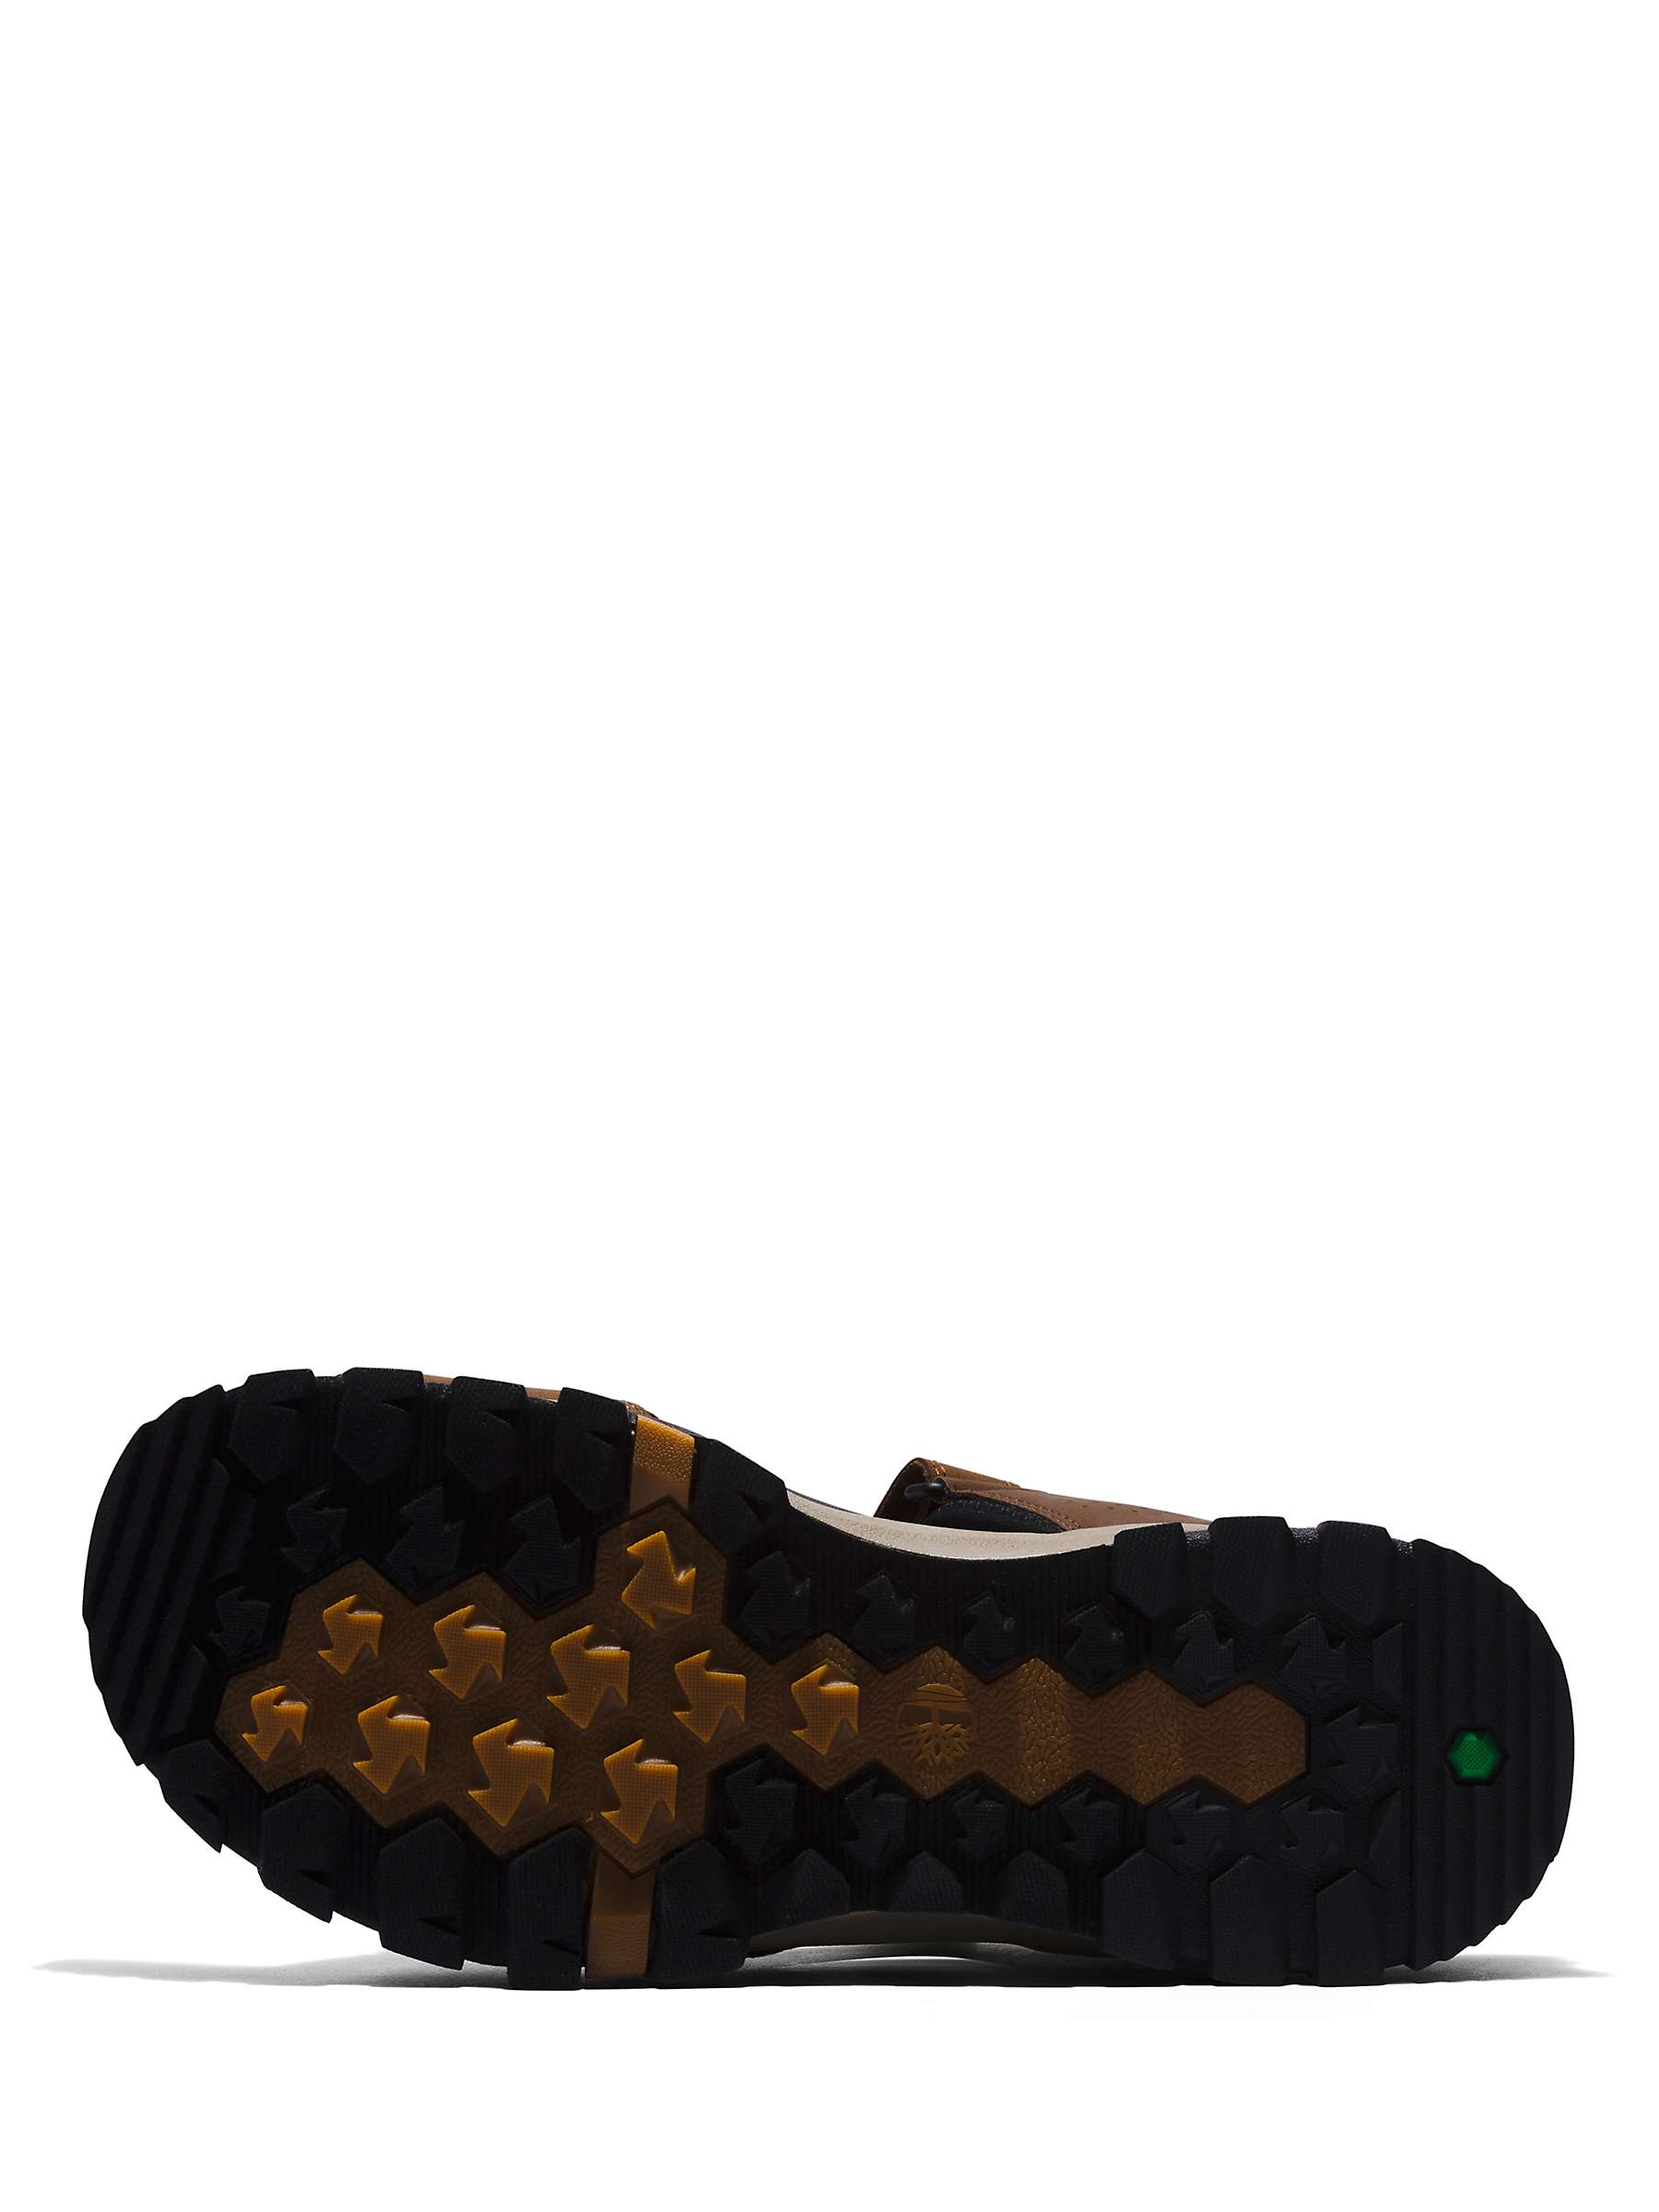 Buy Timberland Lincoln Peak Leather Sandals, Brown Online at johnlewis.com